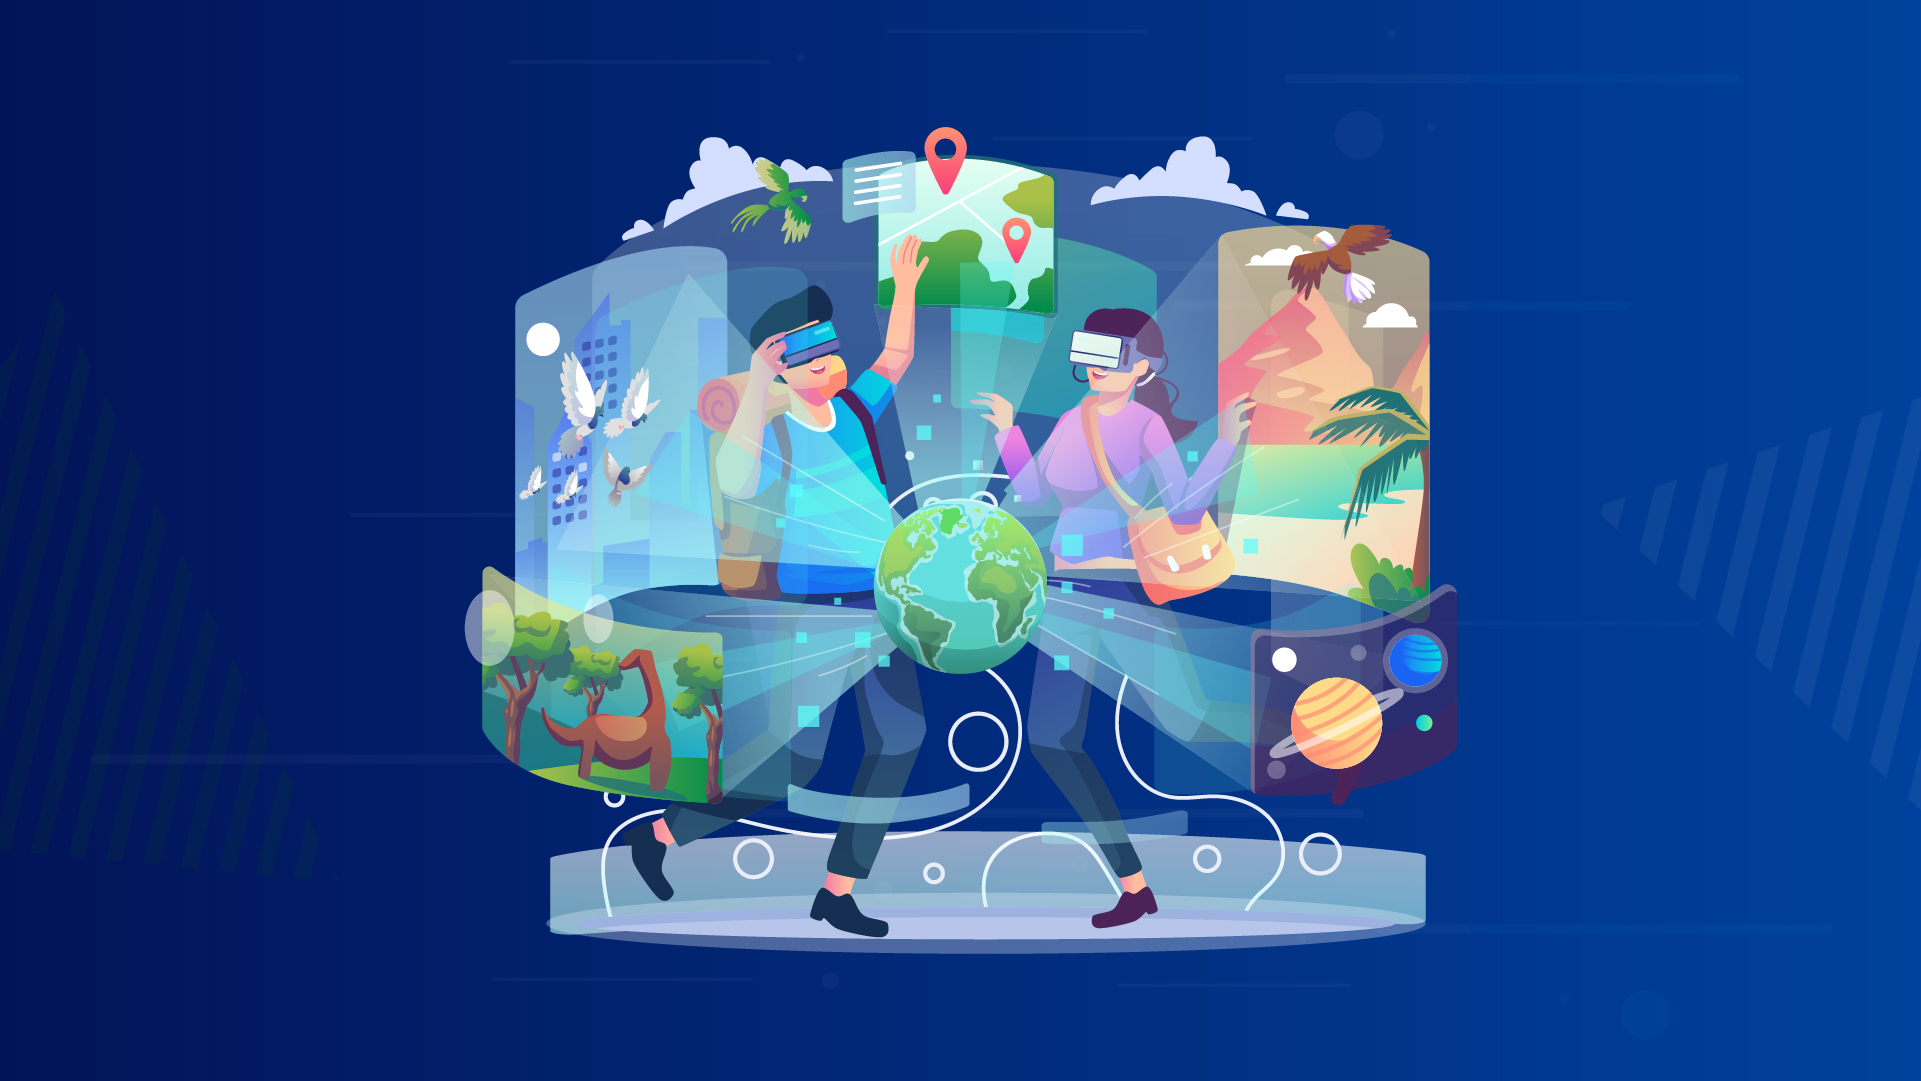 Exploring the Metaverse: How Travel and Tourism Will Change